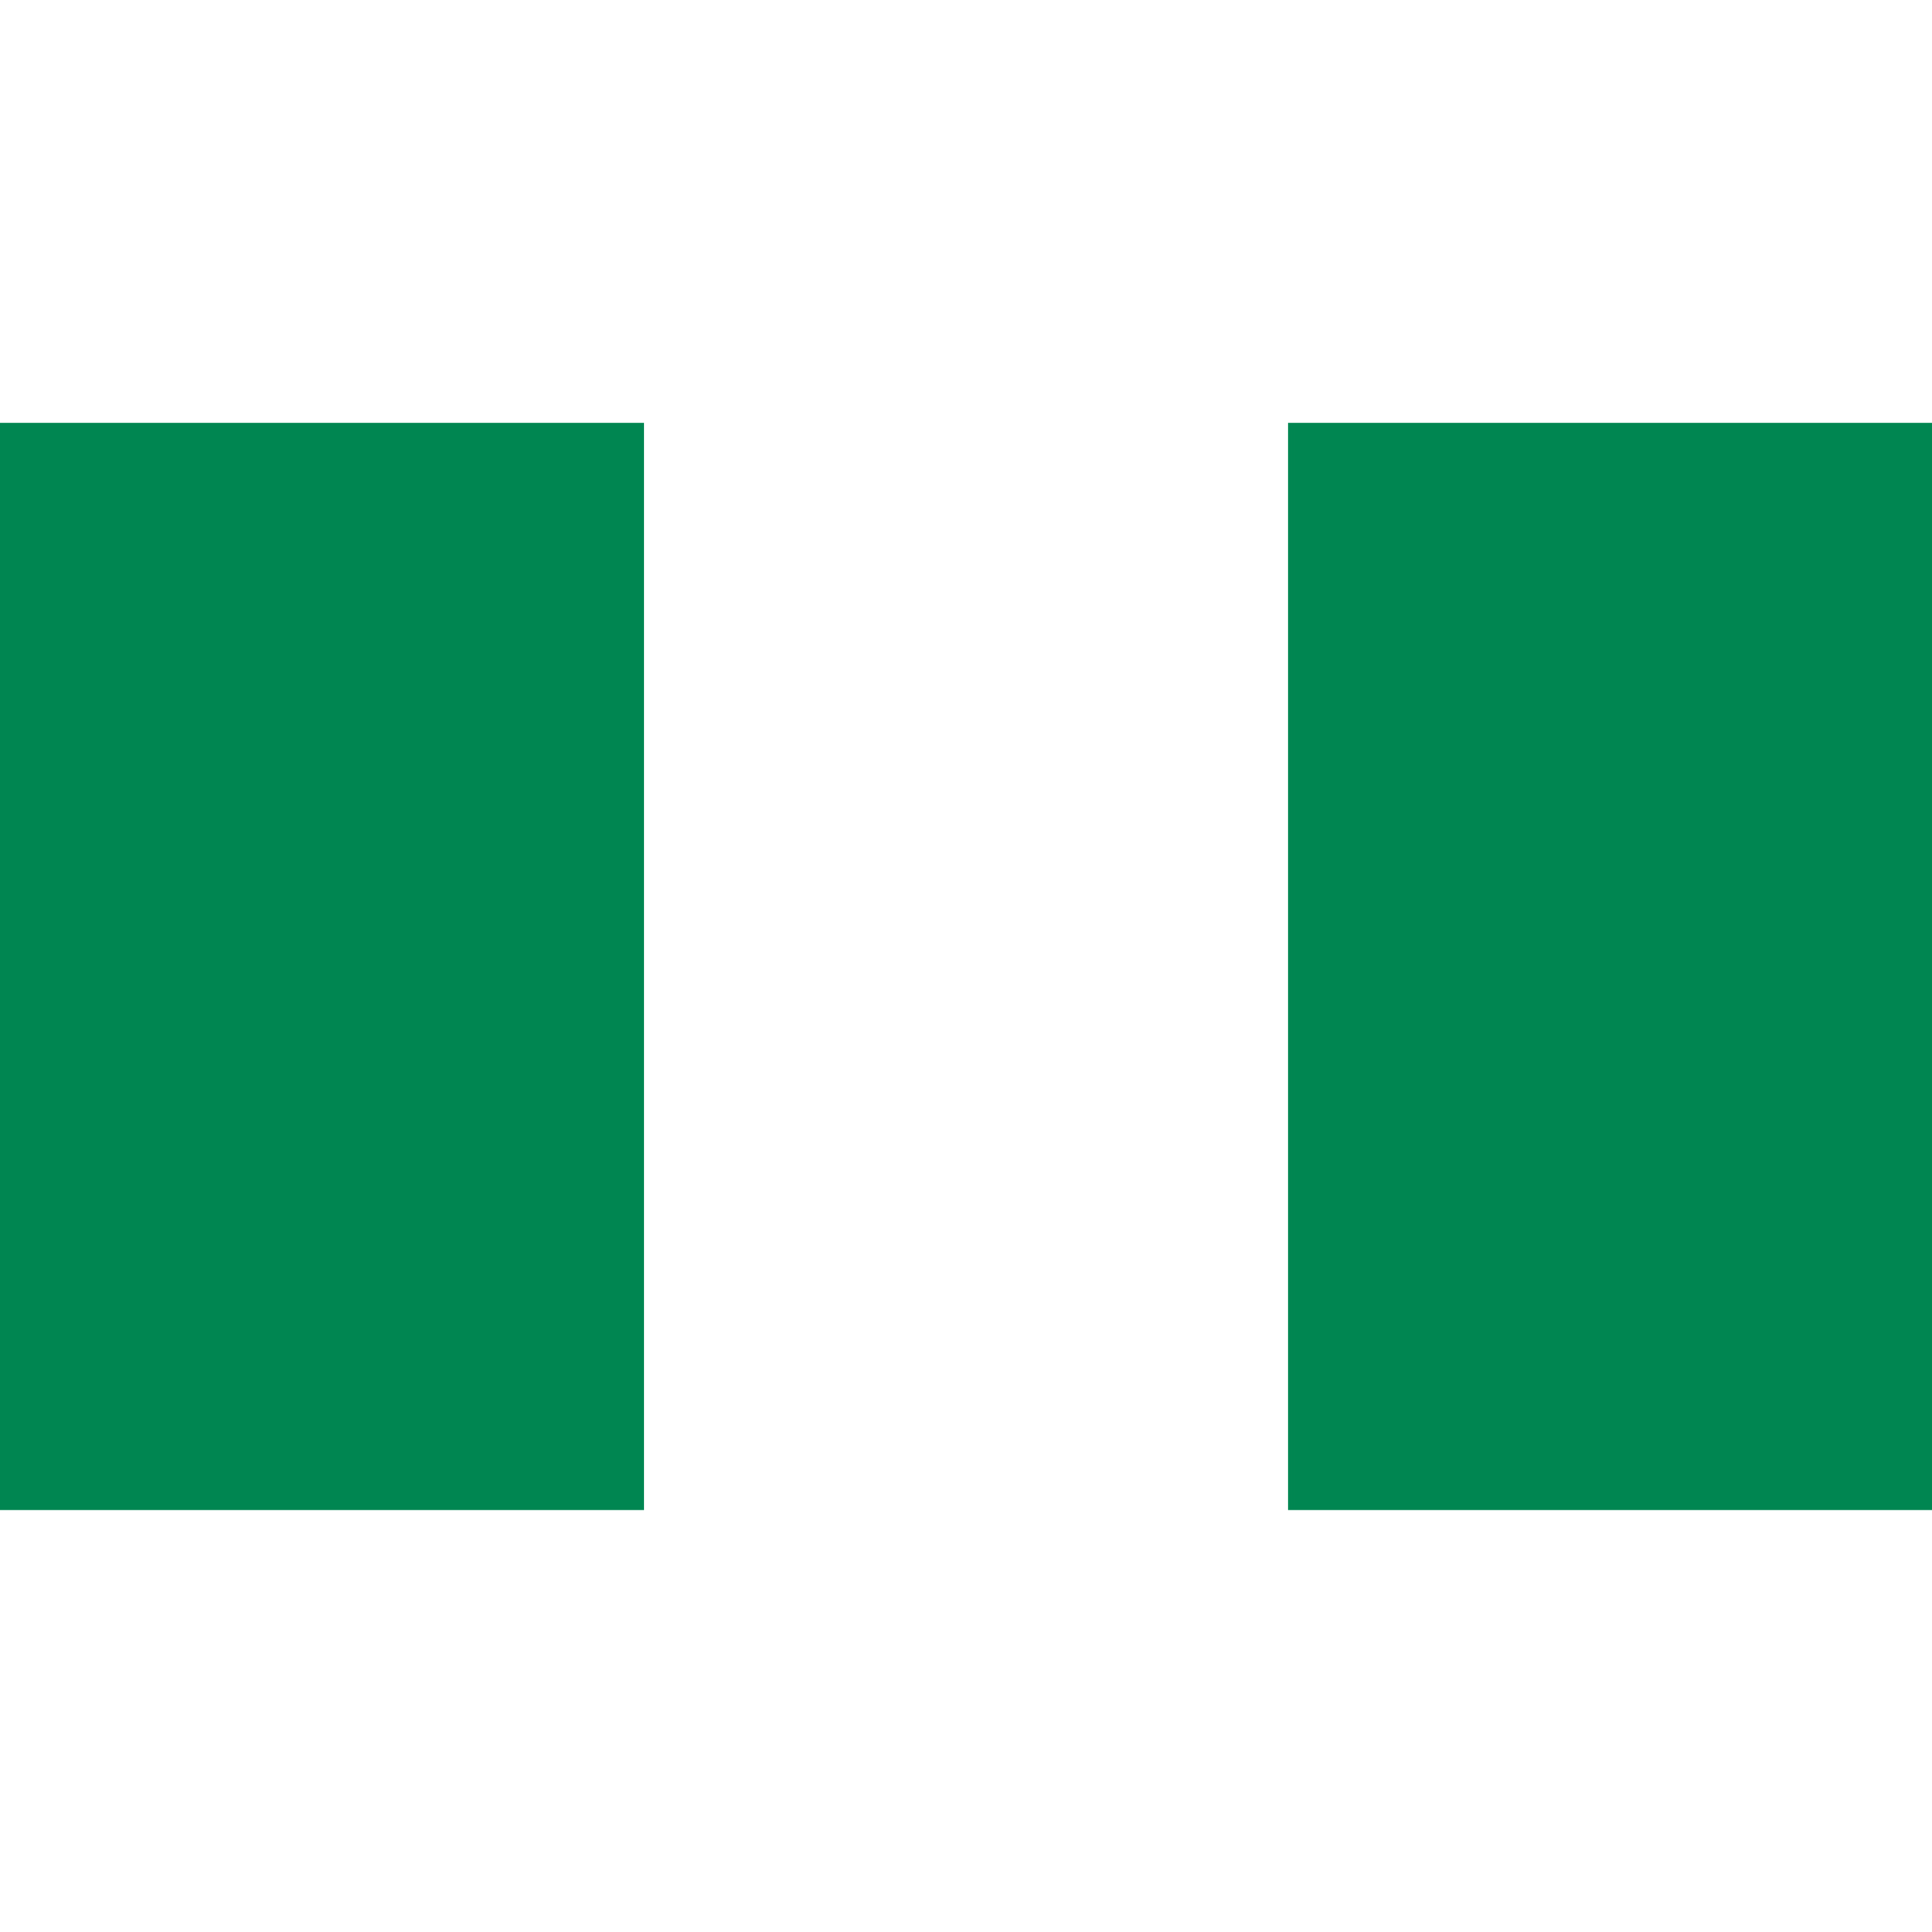 The Nigerian flag has 3 equal vertical bands in green, white and green.